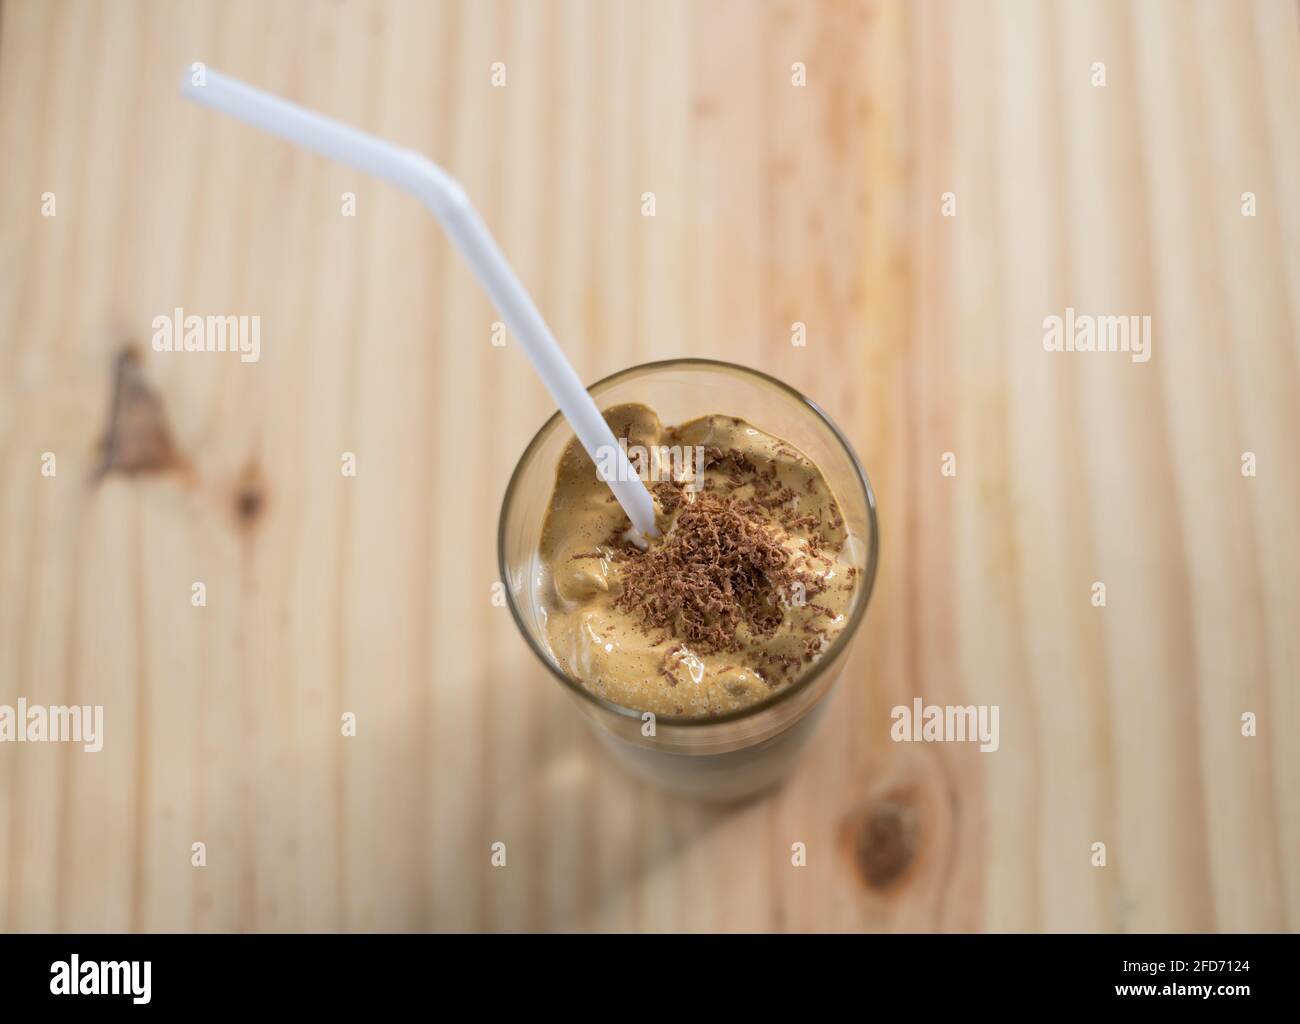 Homemade Dalgona coffee glass in a wooden textured tabletop. whisked instant coffee topping with fresh milk, making the delicious Korean drink. Trendy Stock Photo